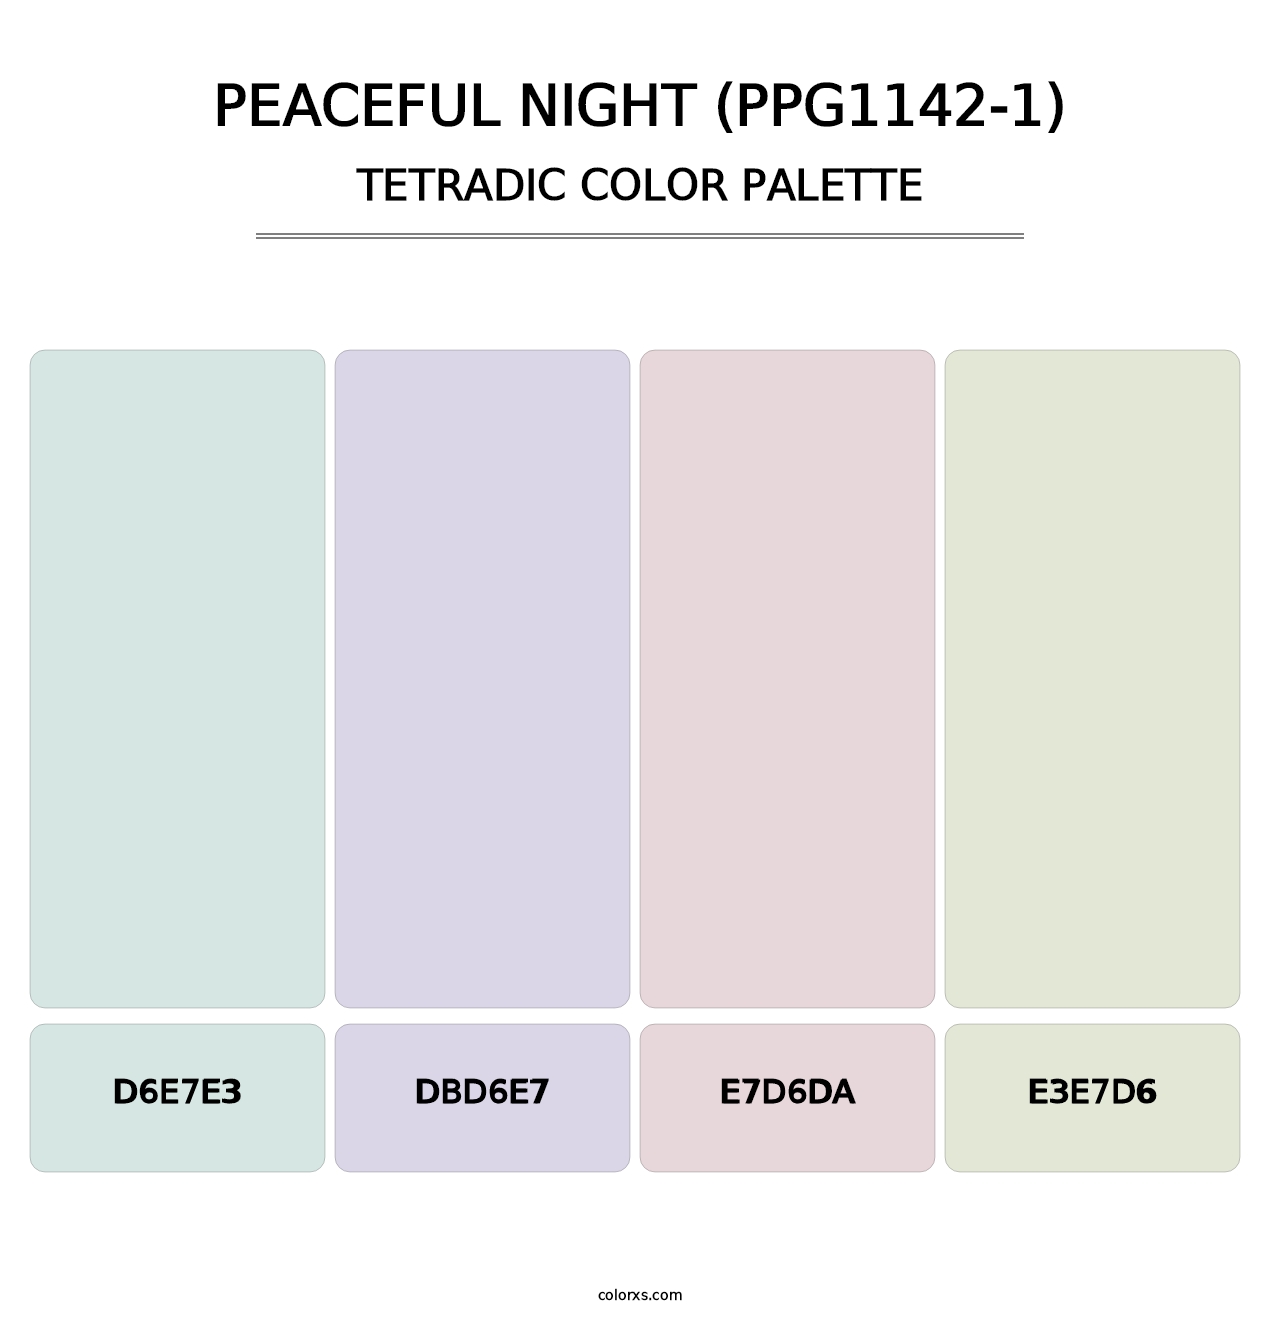 Peaceful Night (PPG1142-1) - Tetradic Color Palette